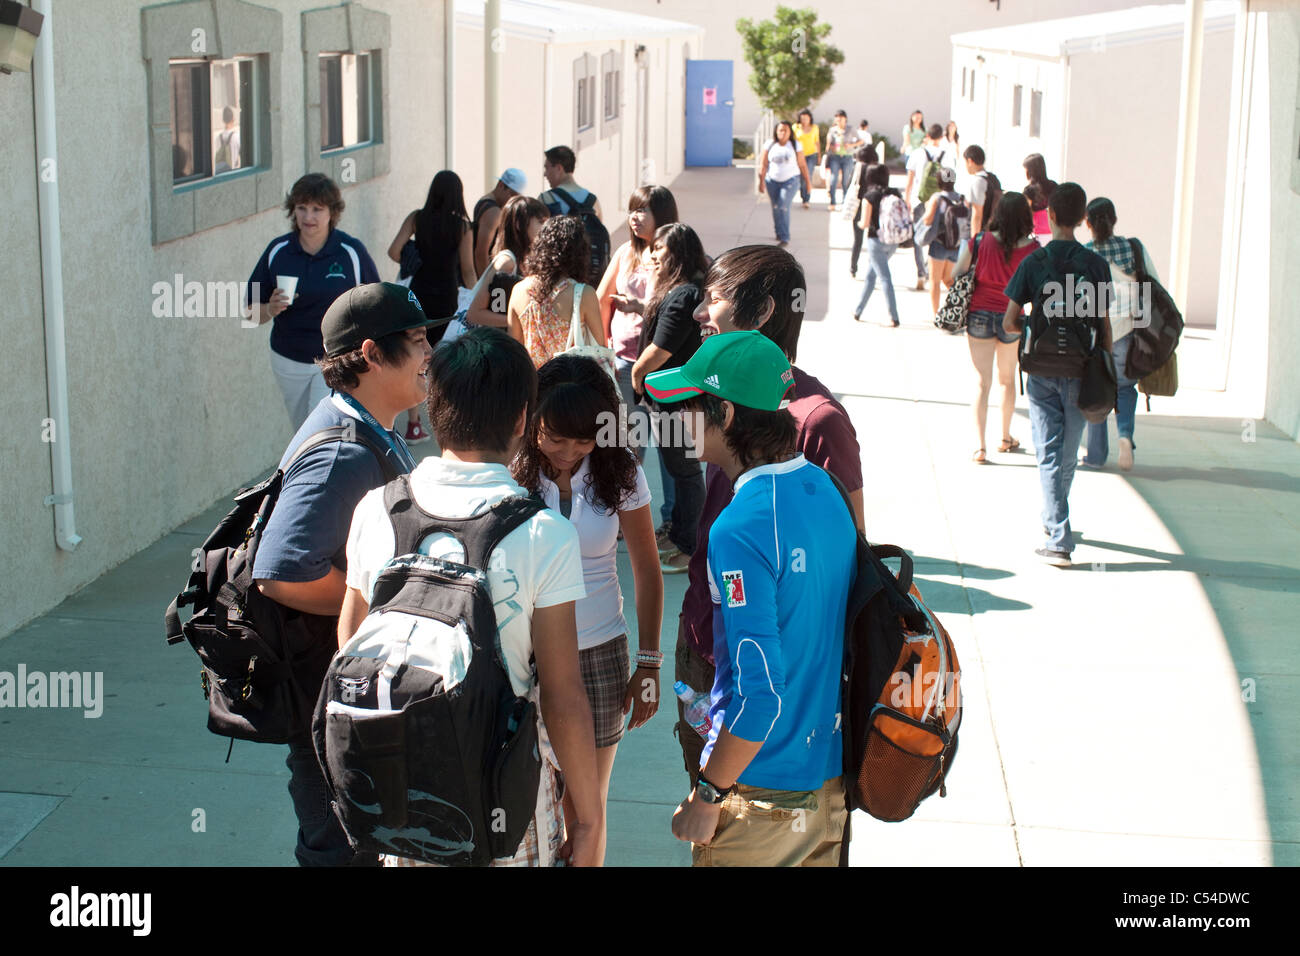 High school students during change of class at outdoor hallway in El Paso, Texas high school Stock Photo